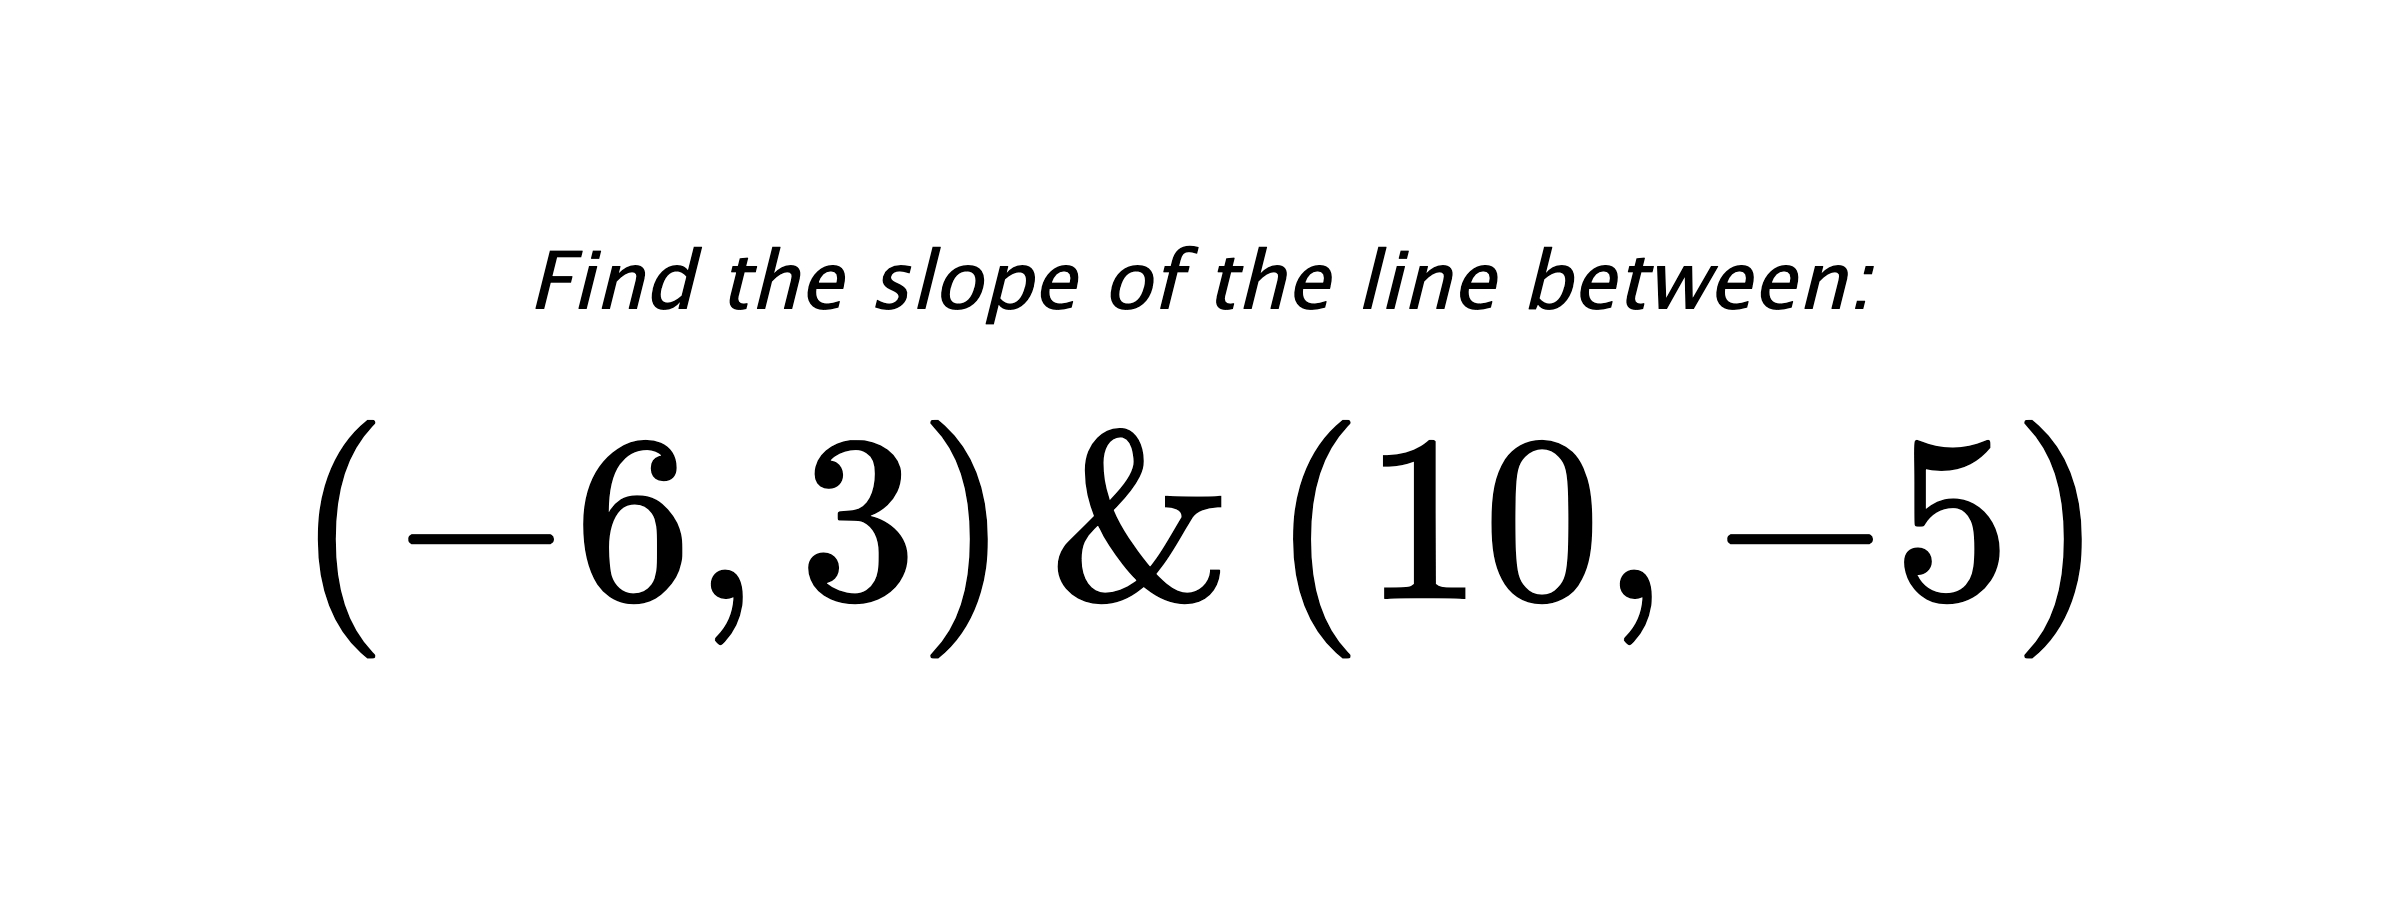 Find the slope of the line between: $ (-6,3) \hspace{0.5cm} \text{&} \hspace{0.5cm} (10,-5) $